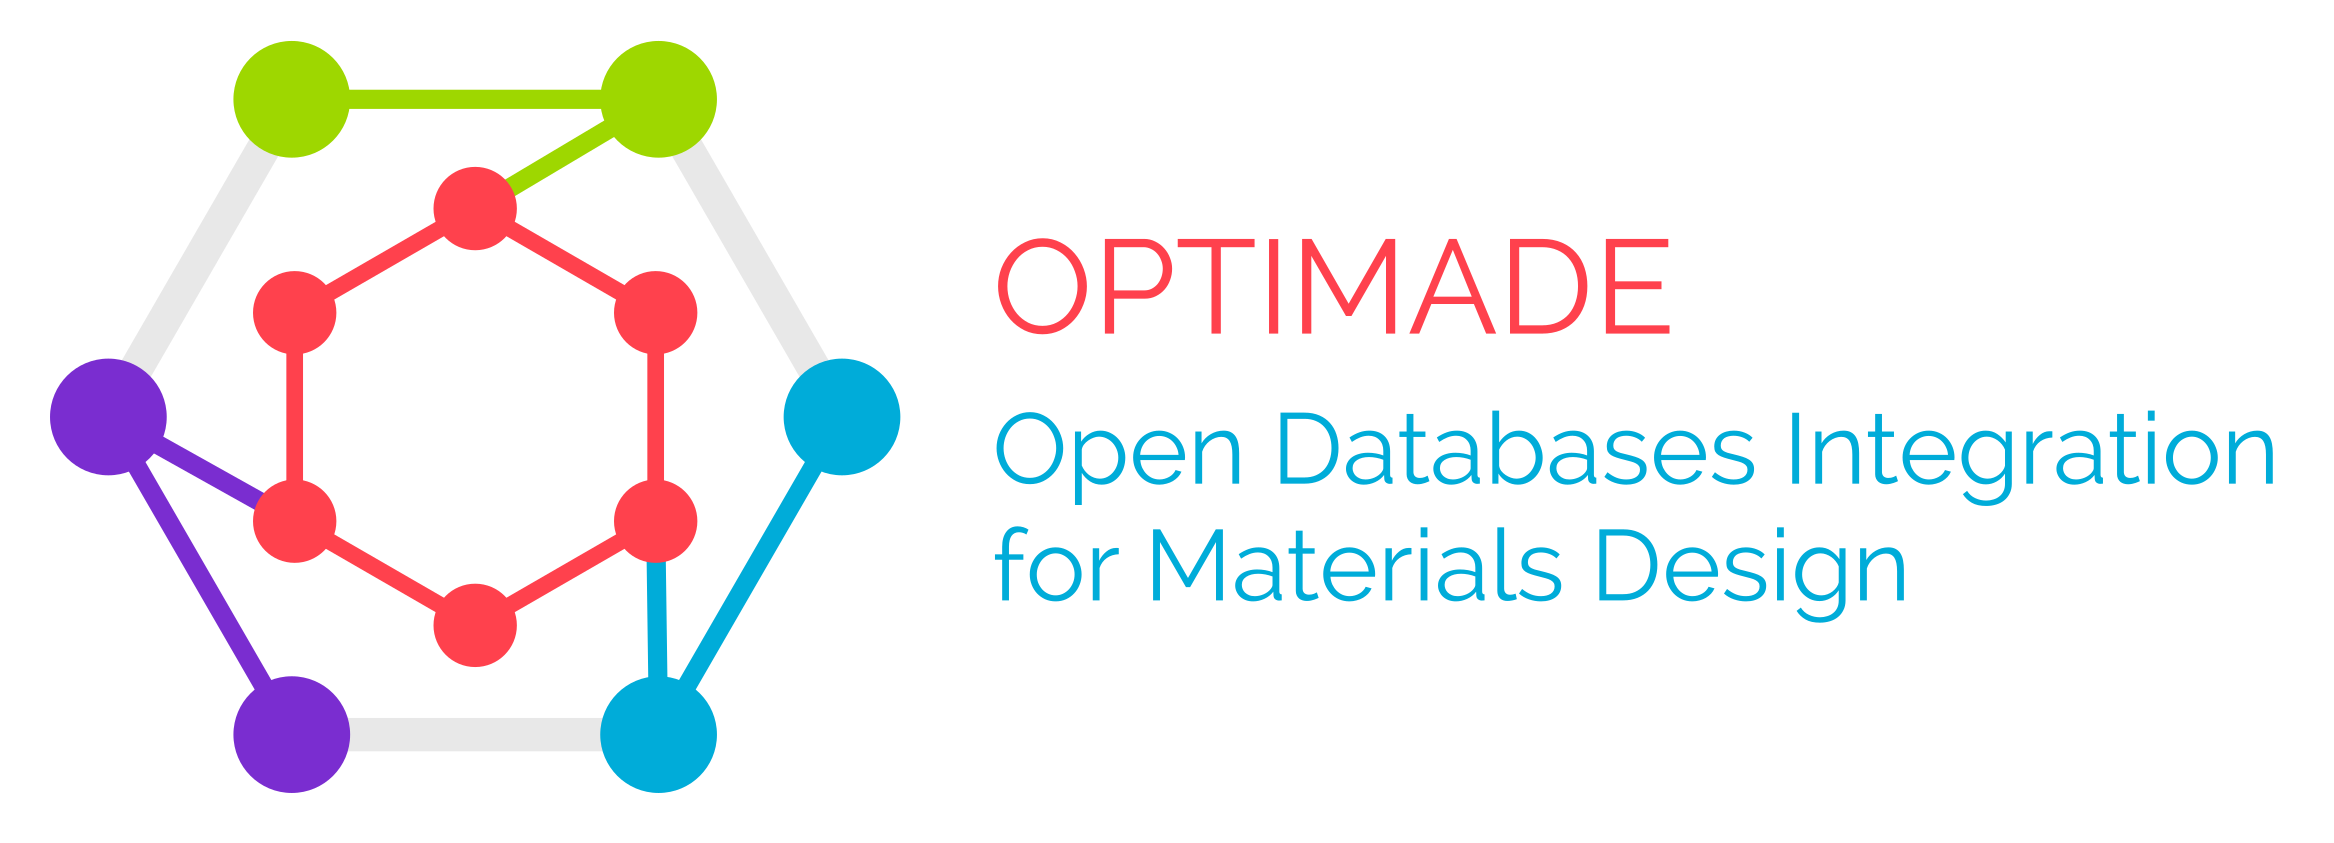 Tutorial: The Open Databases Integration for Materials Design (Optimade) 